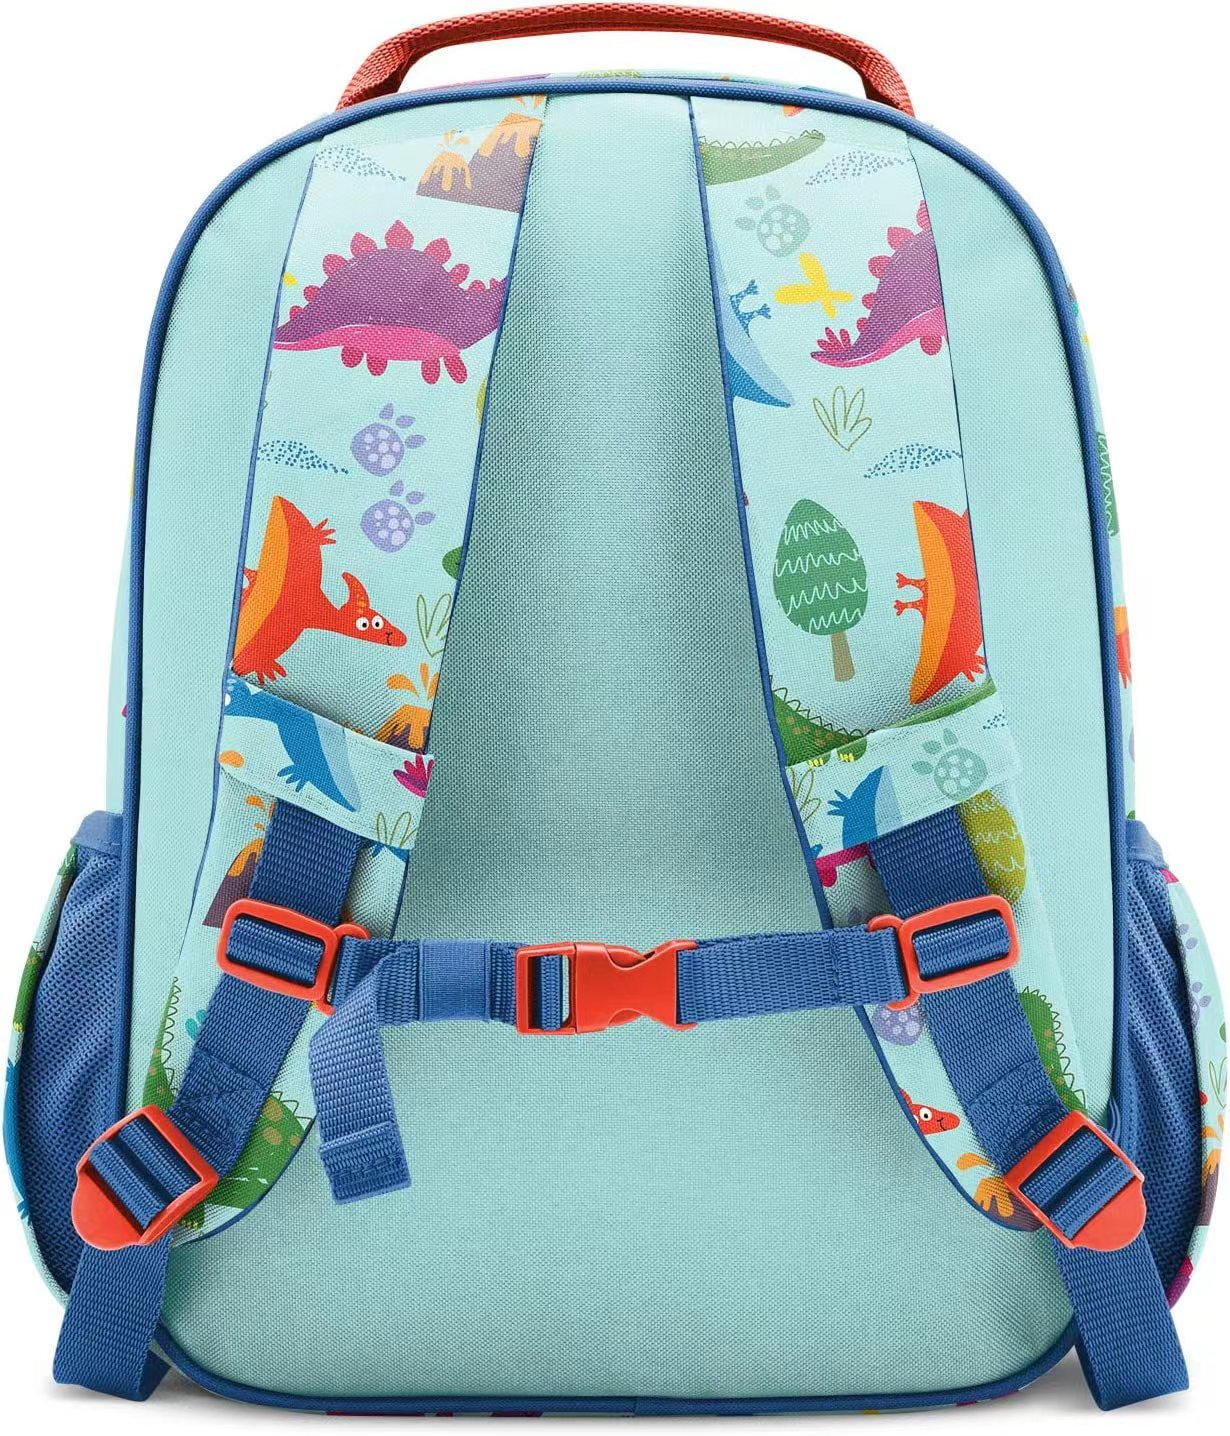 Little Kids Backpack Dinosaur Discovery